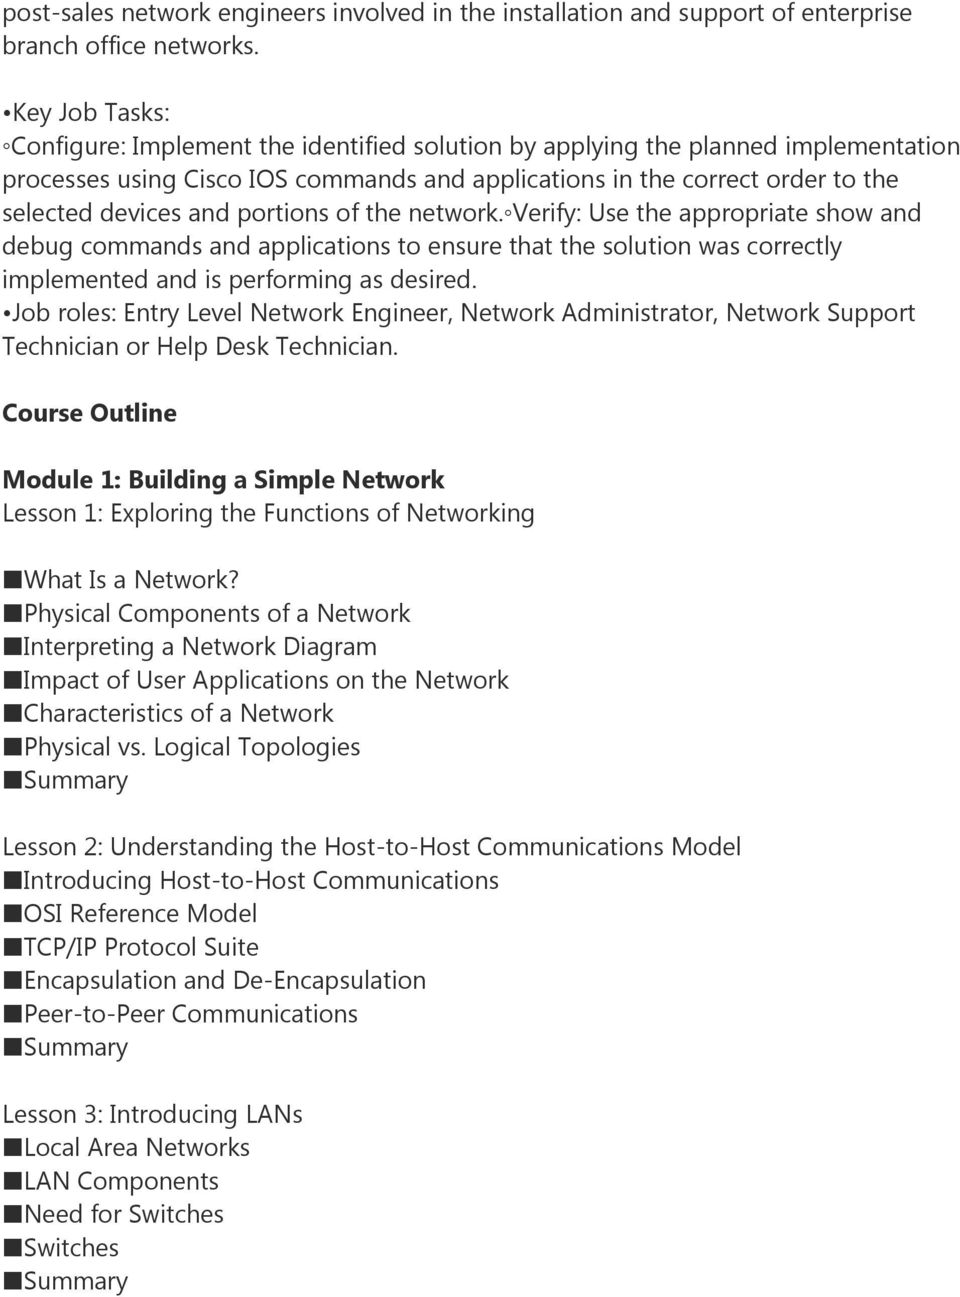 portions of the network. Verify: Use the appropriate show and debug commands and applications to ensure that the solution was correctly implemented and is performing as desired.